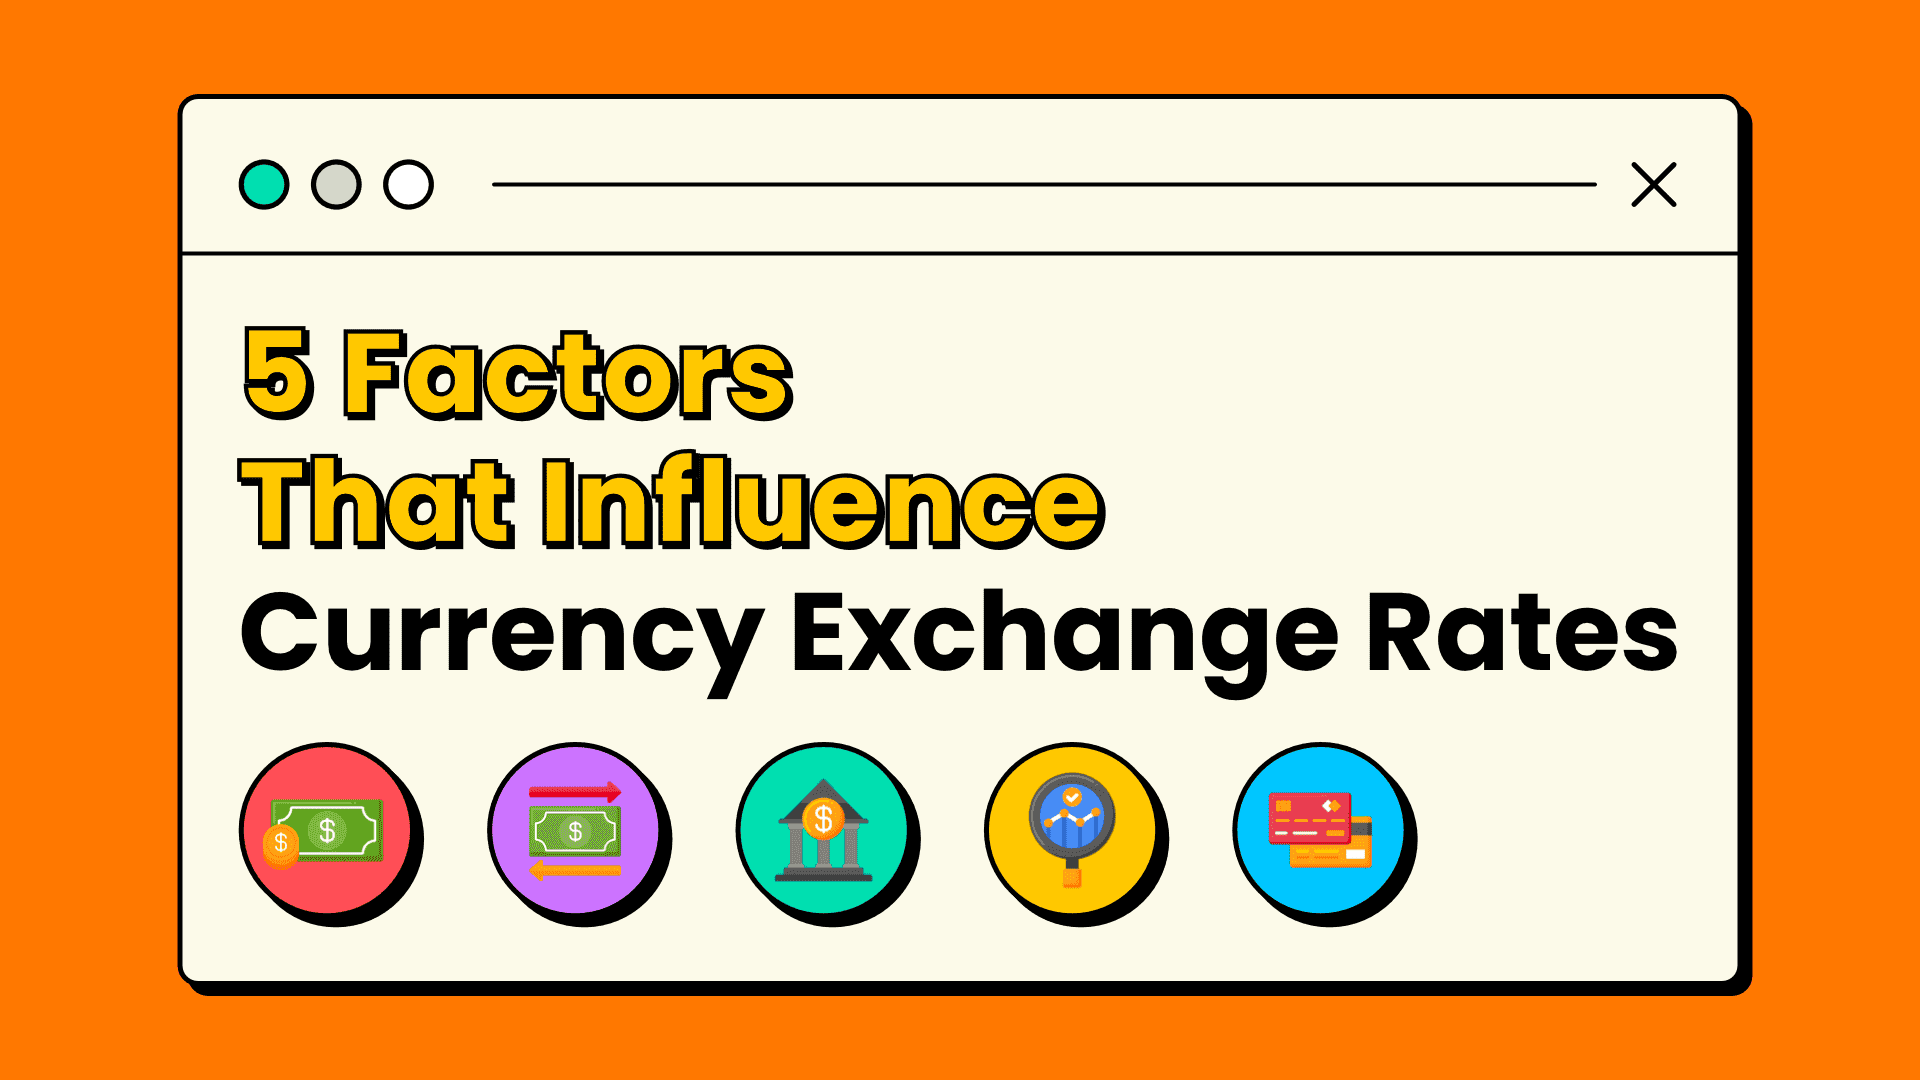 5-Features-Influencing-Currency-Exchanges-Rate-Feature-Image-6AoVs.png